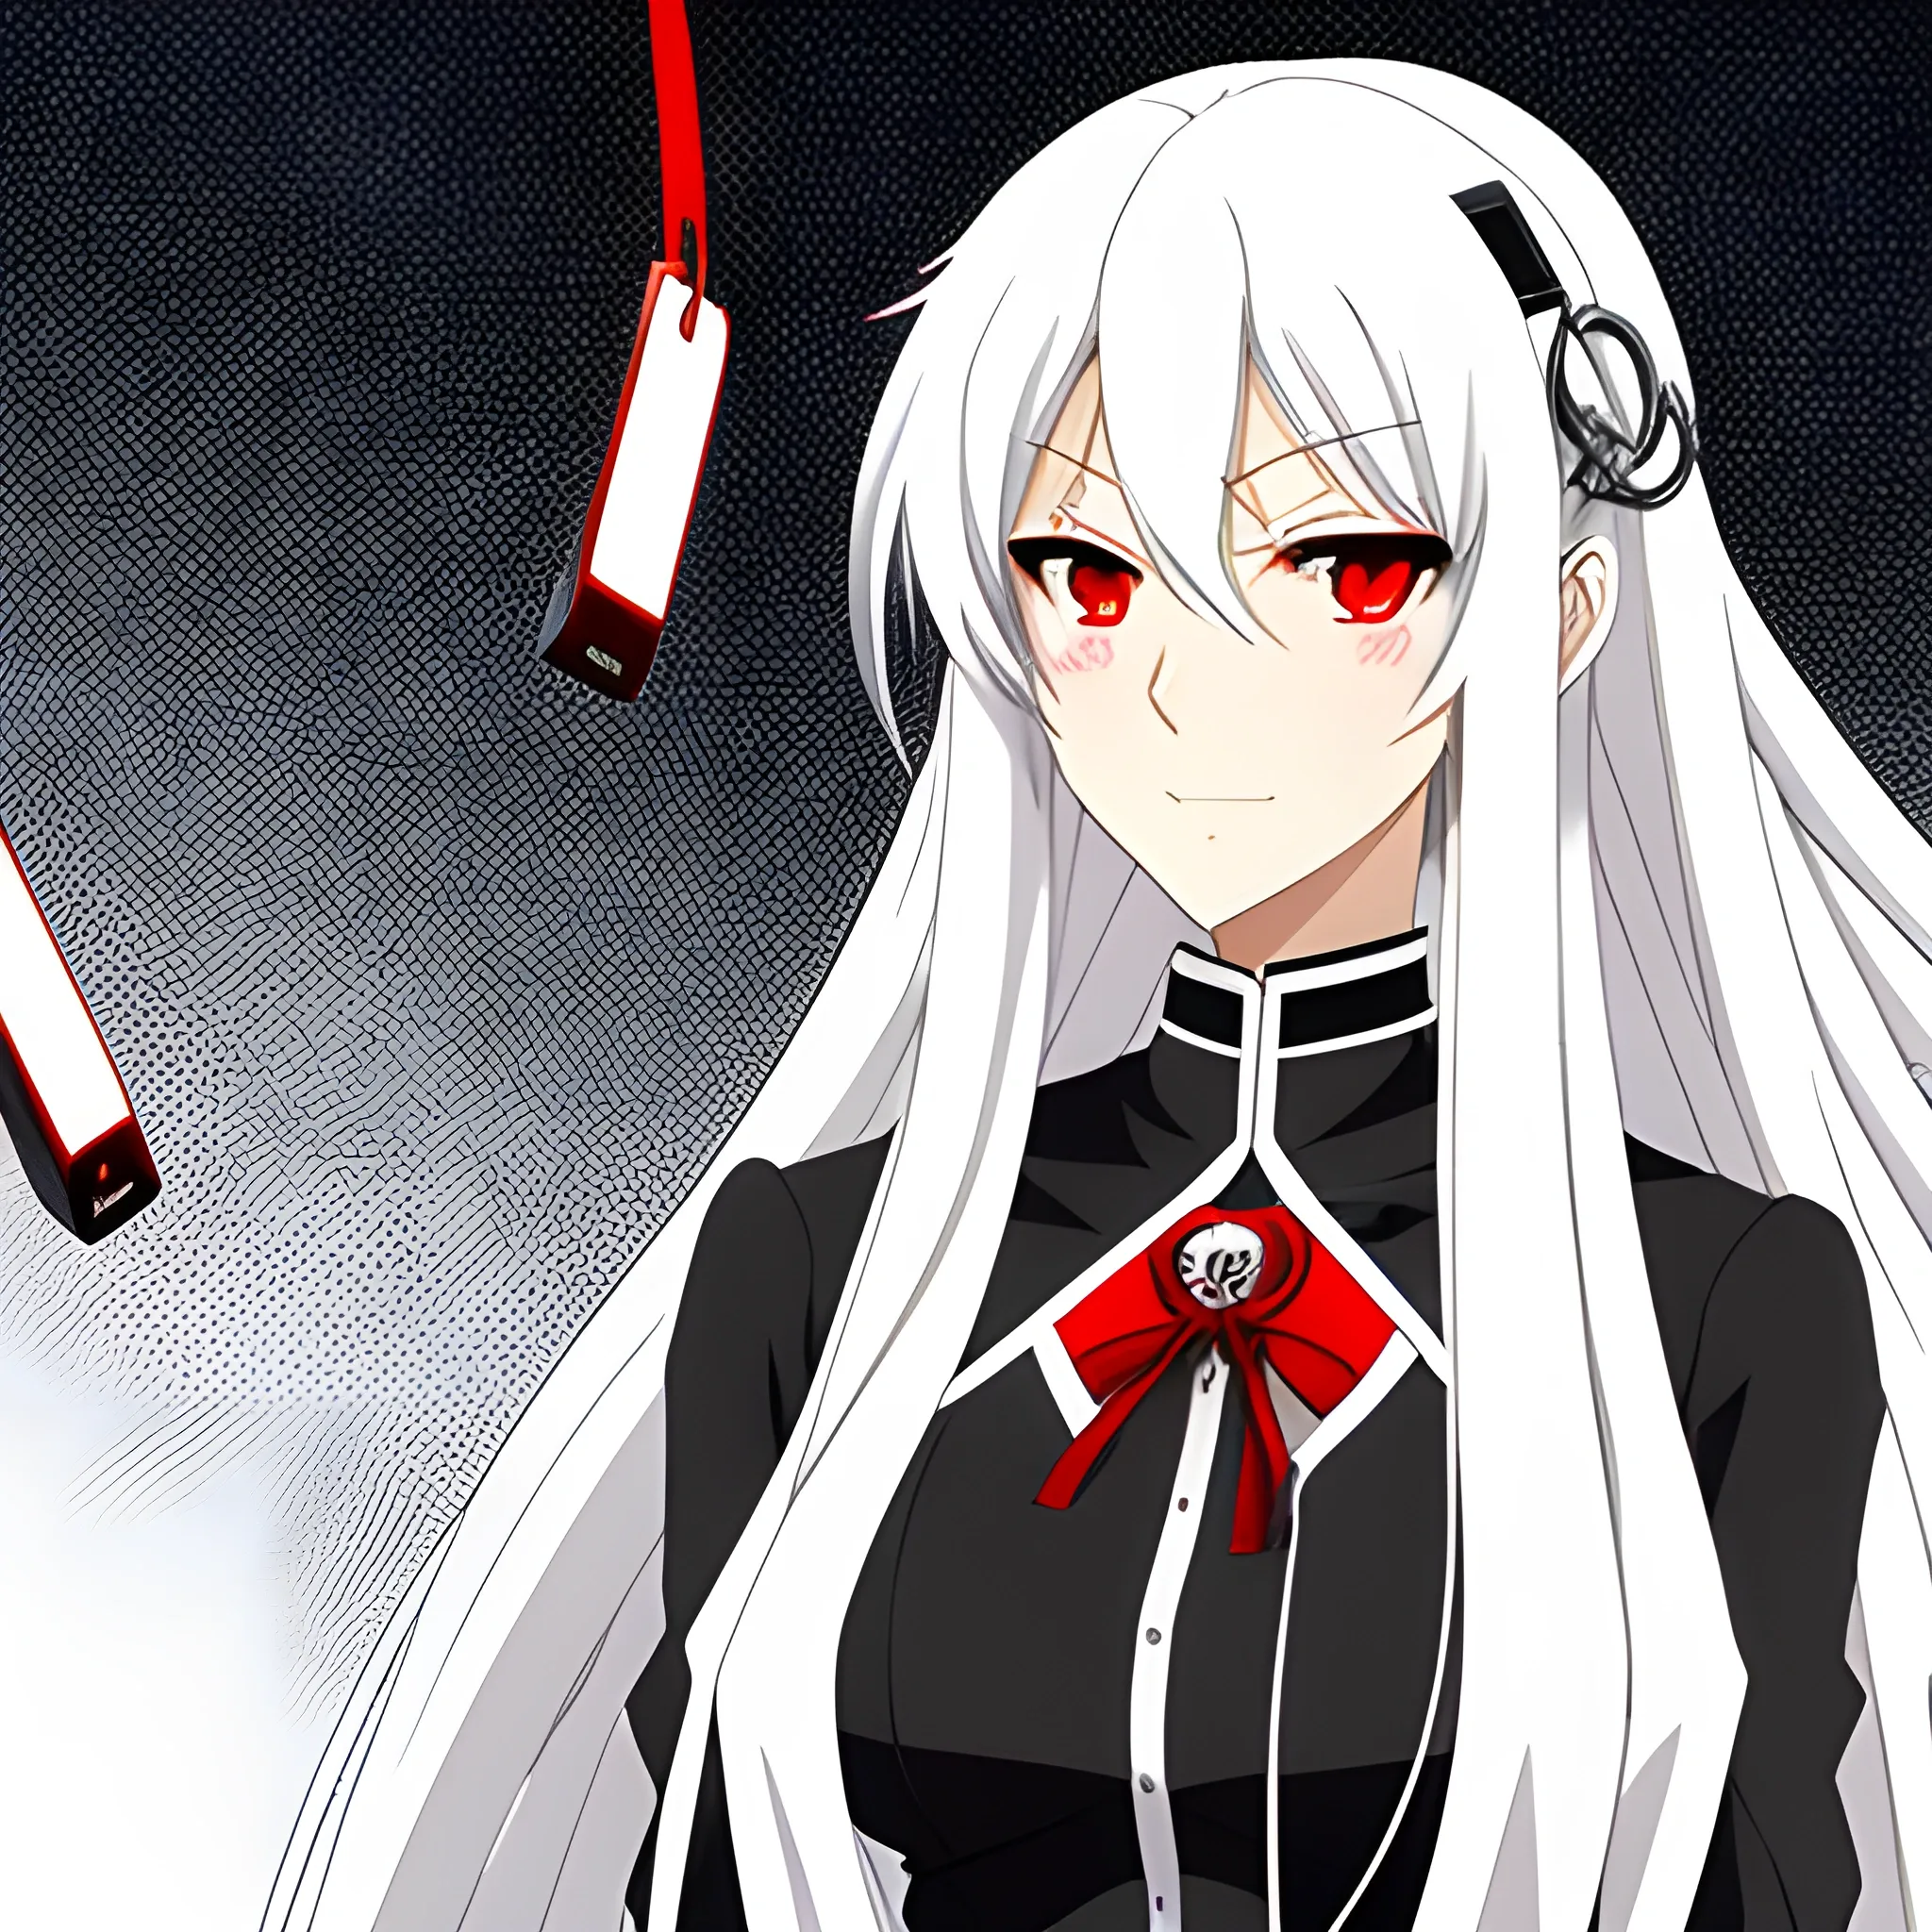 Anime: 10 Most Iconic Anime Girls With White Hair